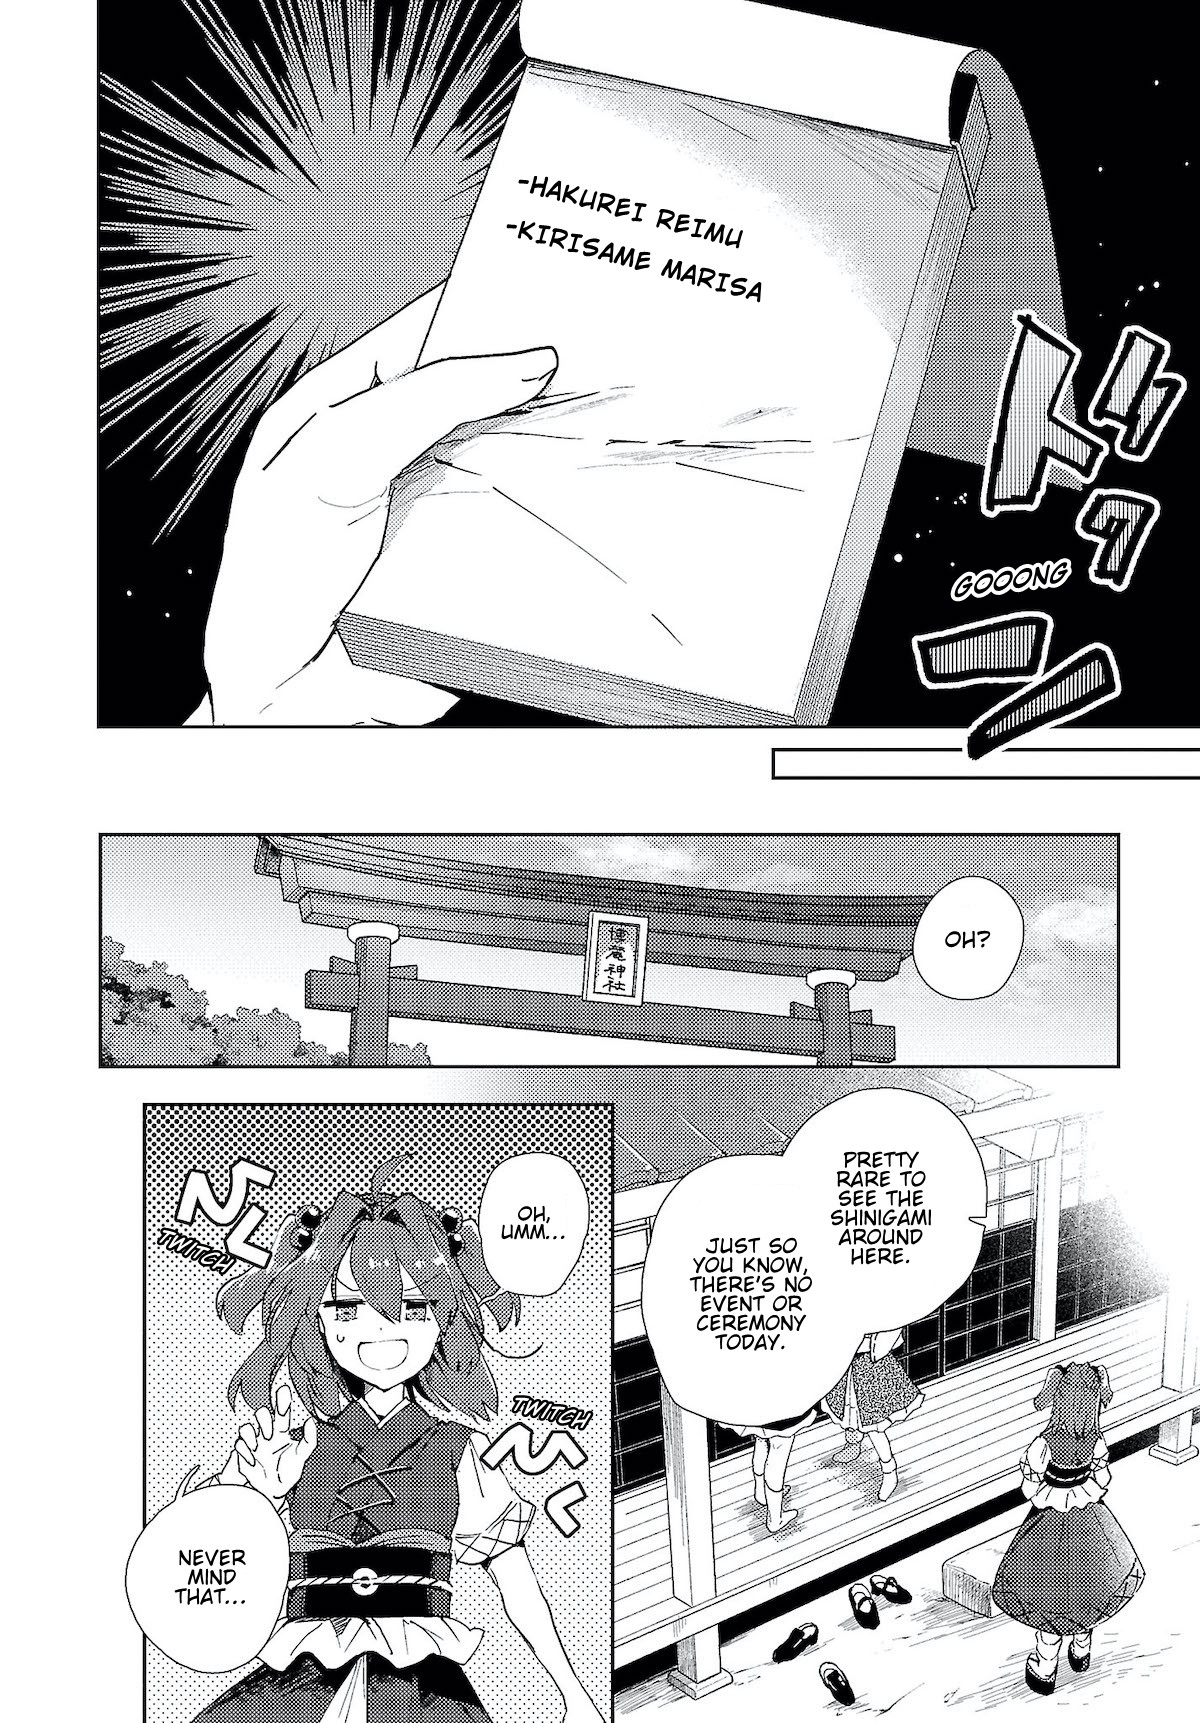 The Shinigami's Rowing Her Boat As Usual - Touhou - Page 2